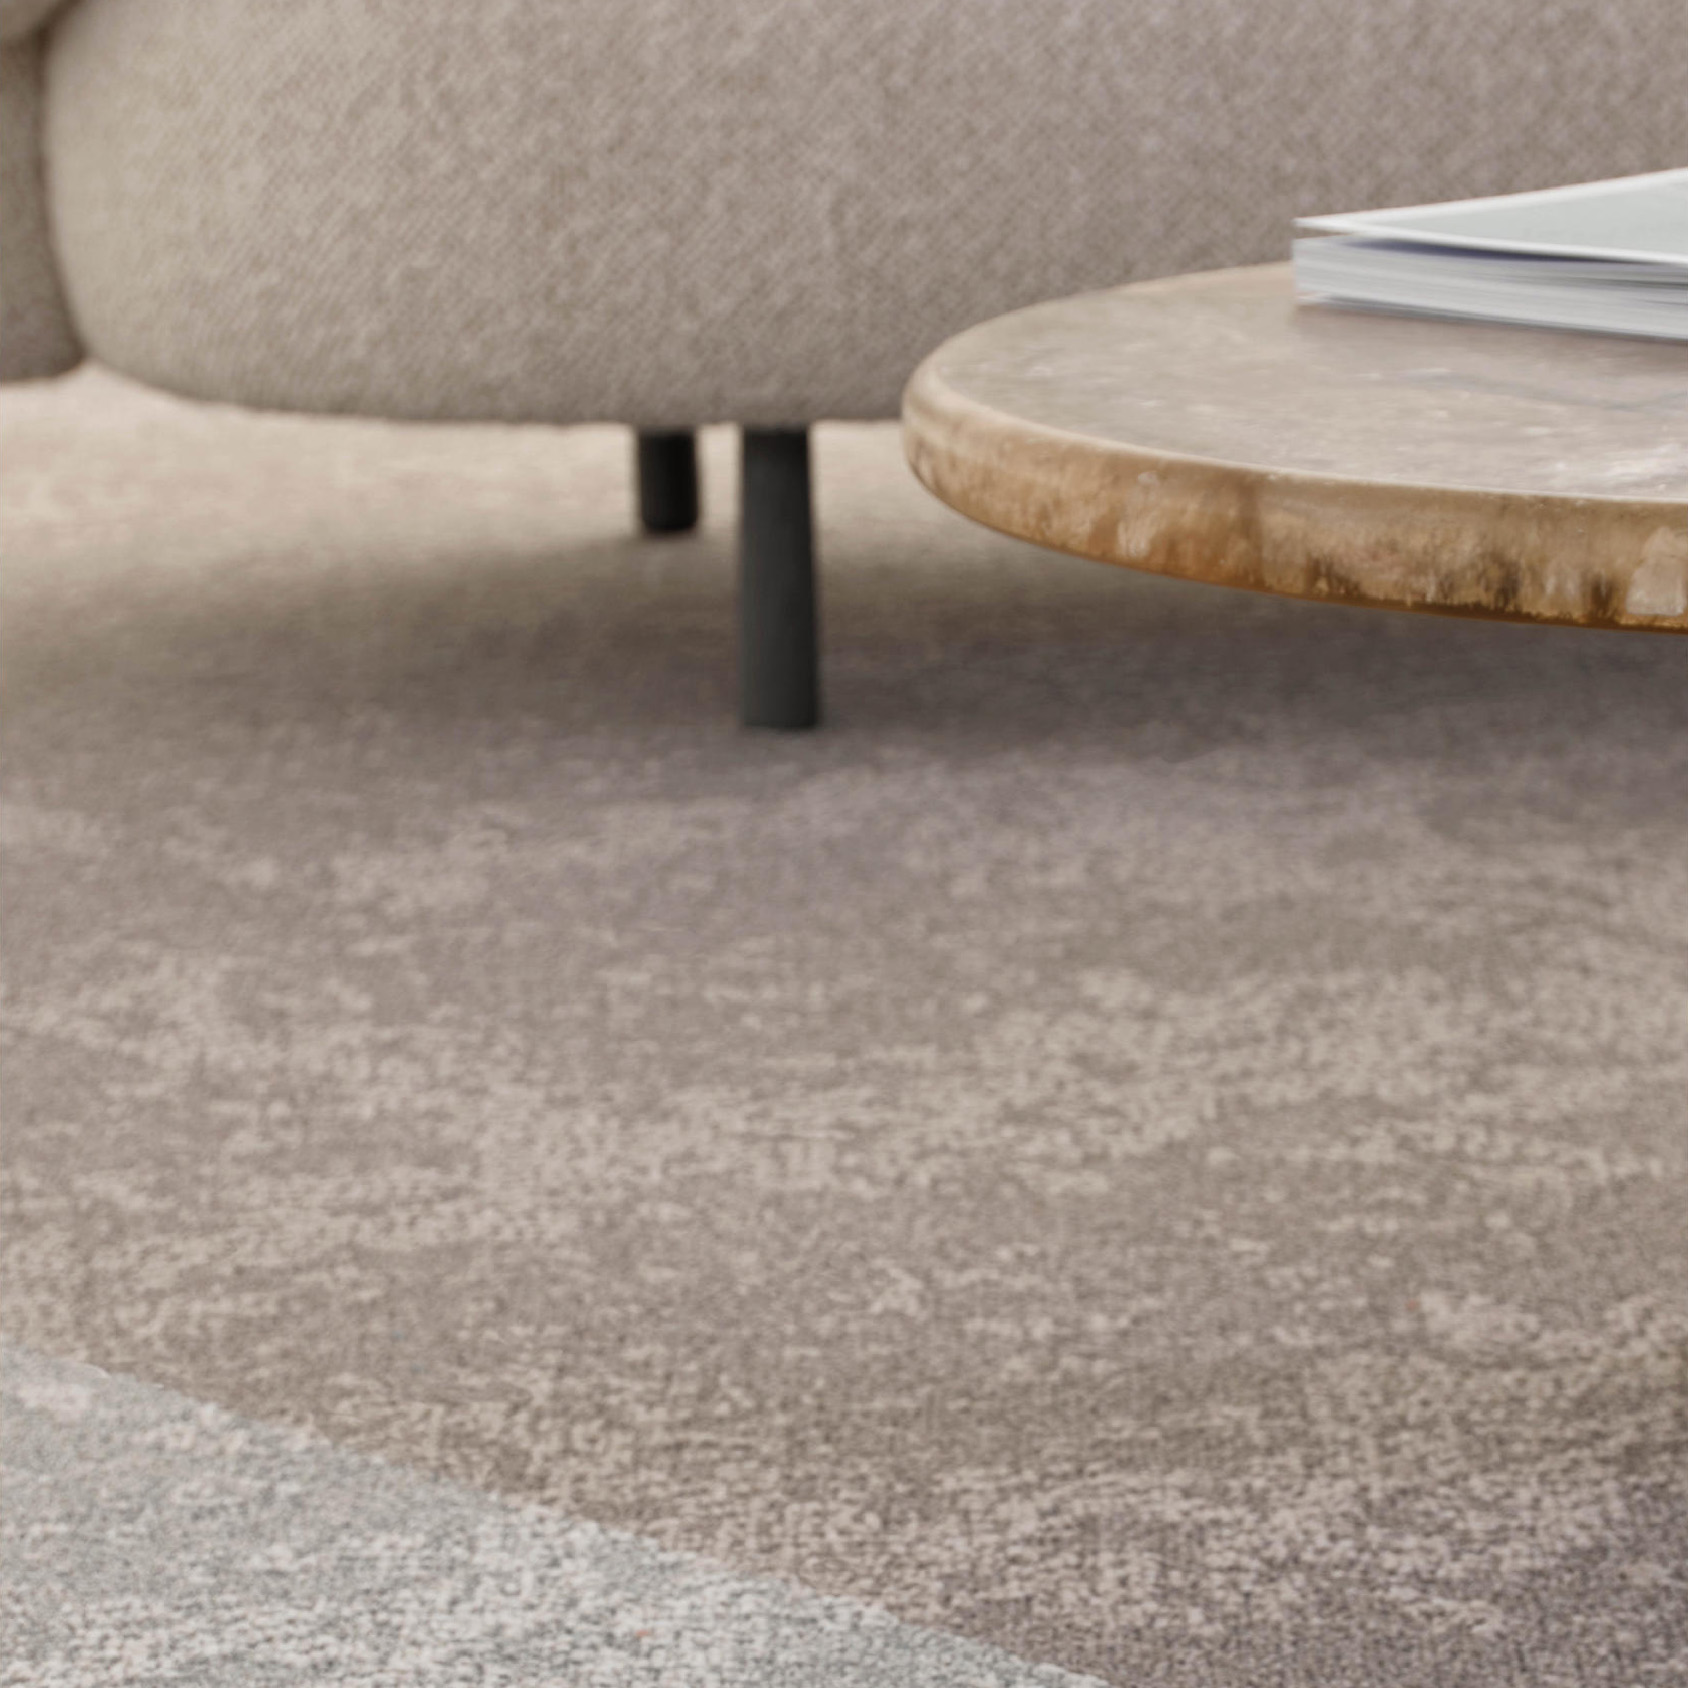 Desso Arable Carpet Tile with low lying tables in commercial office space